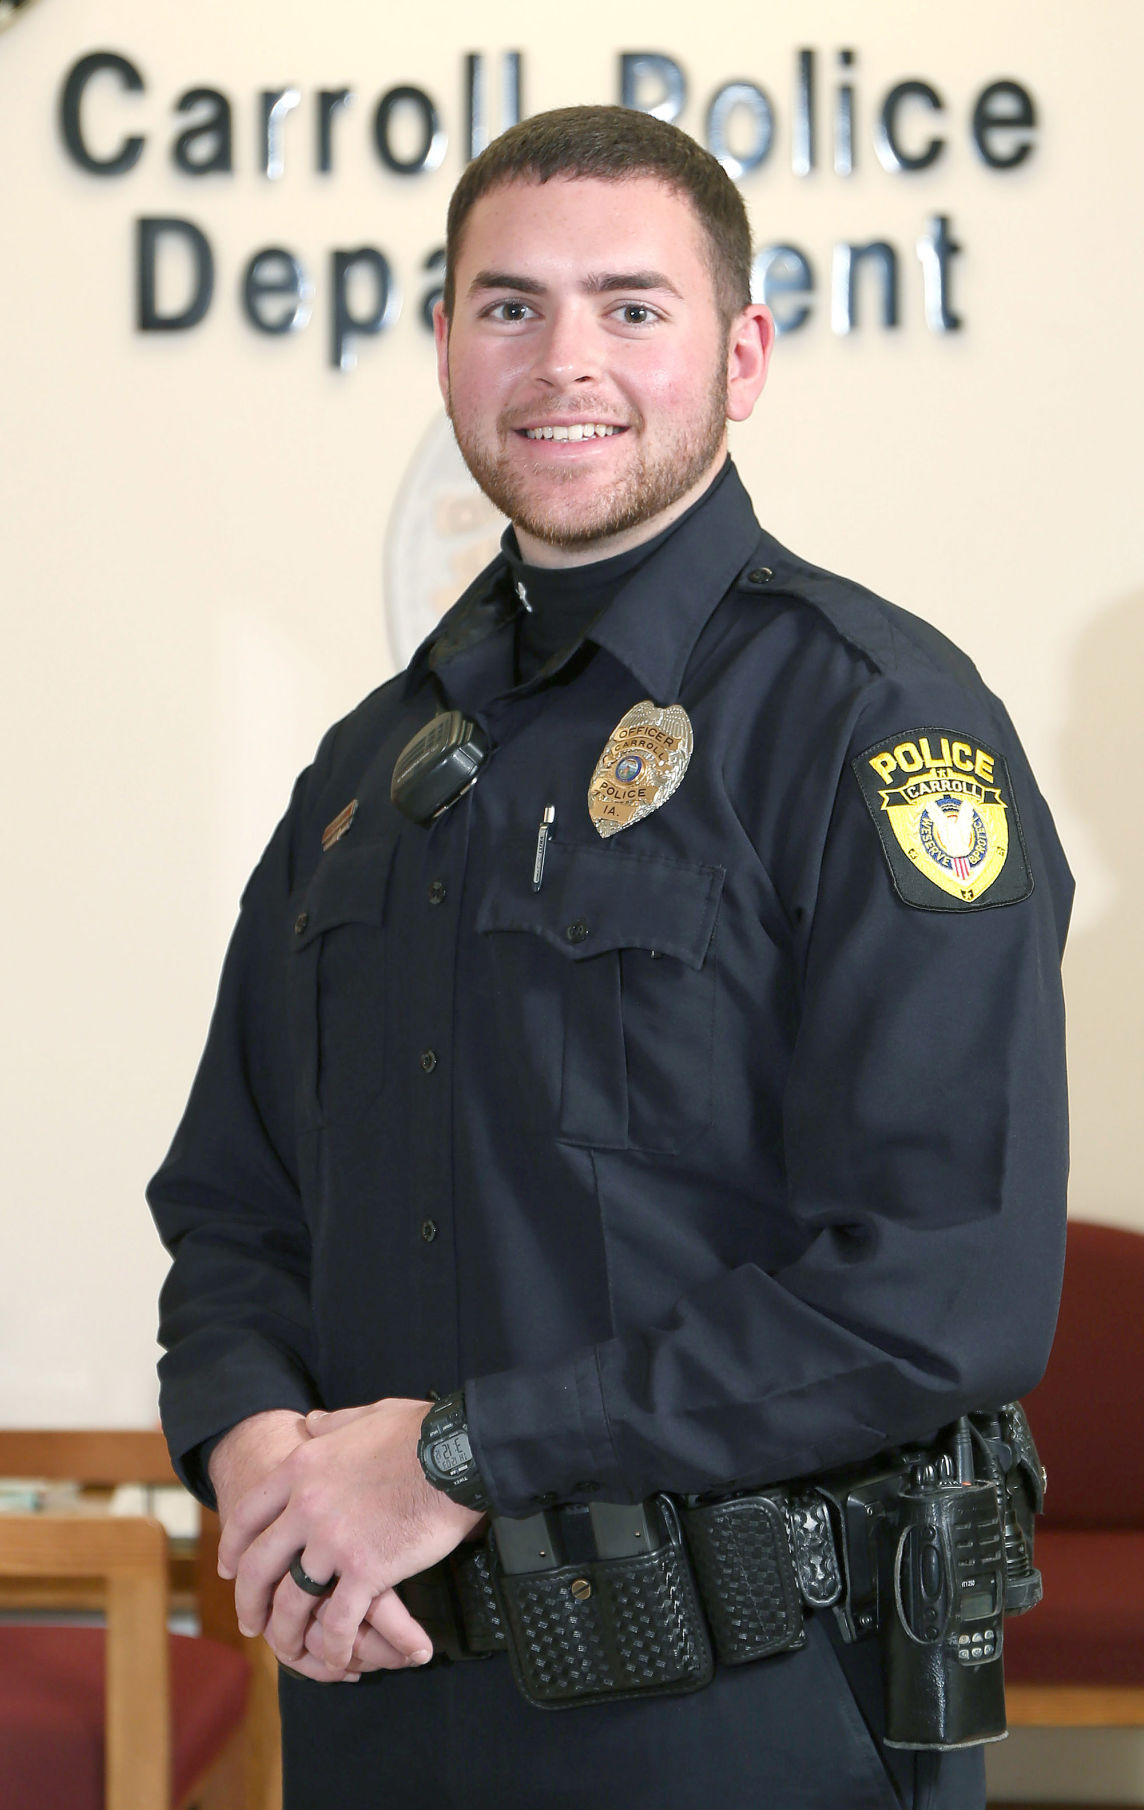 Carroll cop who courted teenage girls resigns News carrollspaper pic